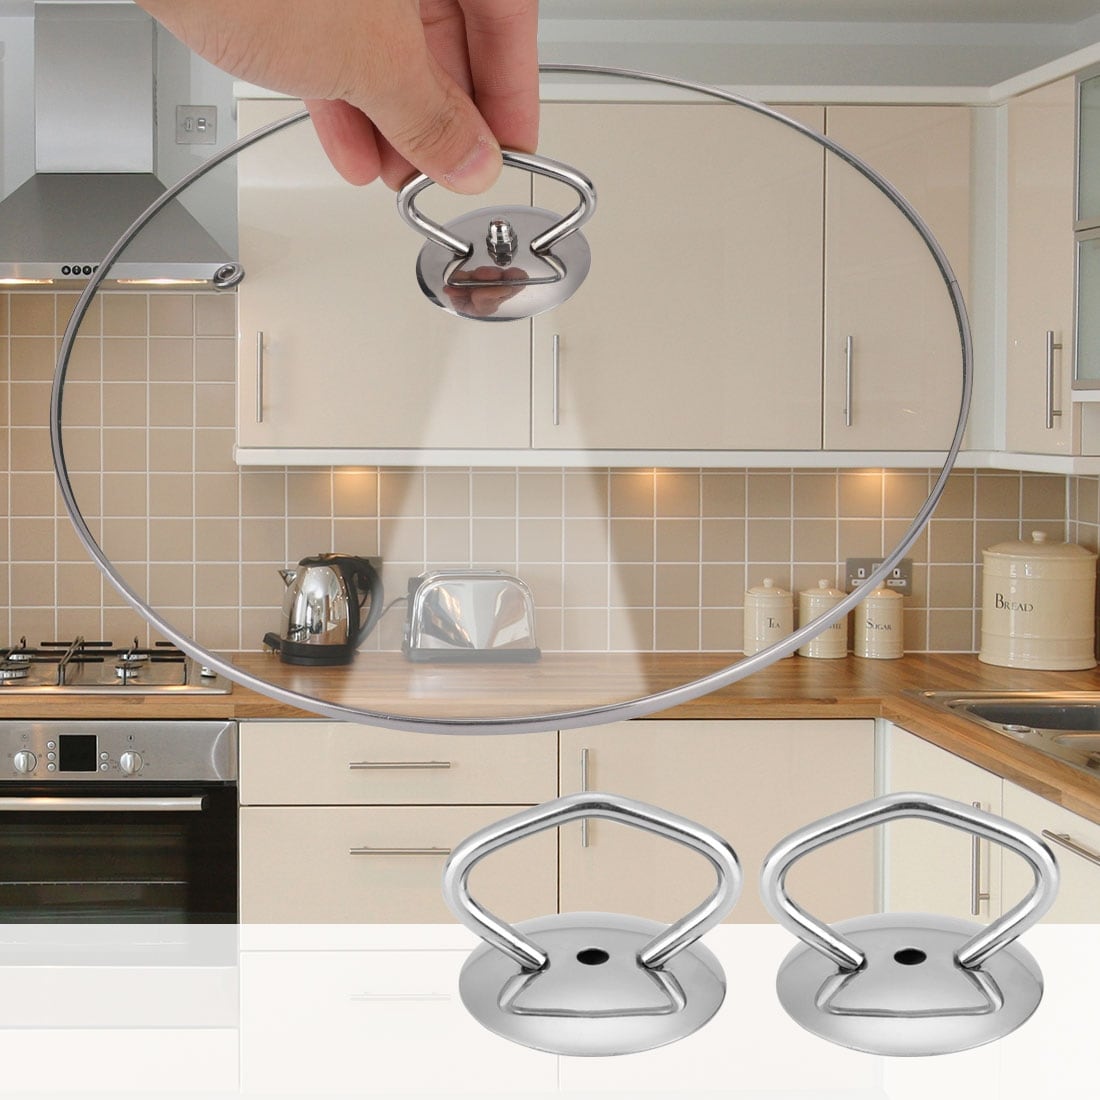 https://ak1.ostkcdn.com/images/products/is/images/direct/f09a1fa9d8c632e4dbad99f1e7340f7dcb1d8630/2pcs-Stainless-Steel-Pot-Lid-Knob-Universal-Kitchen-Bakeware-Handle-Replacement.jpg